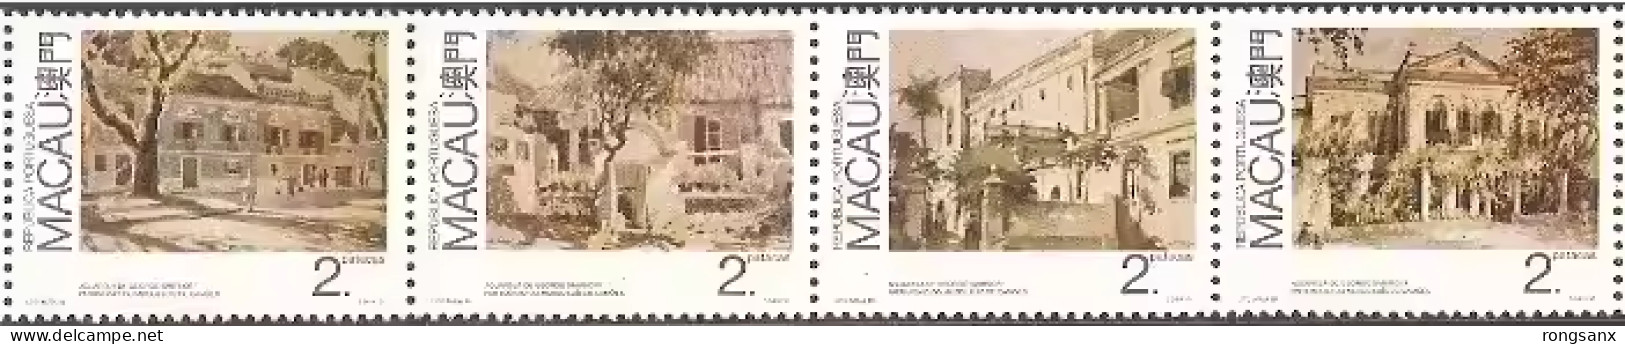 1989  MACAO COLORFUL Paintings 4v STAMP - Ungebraucht